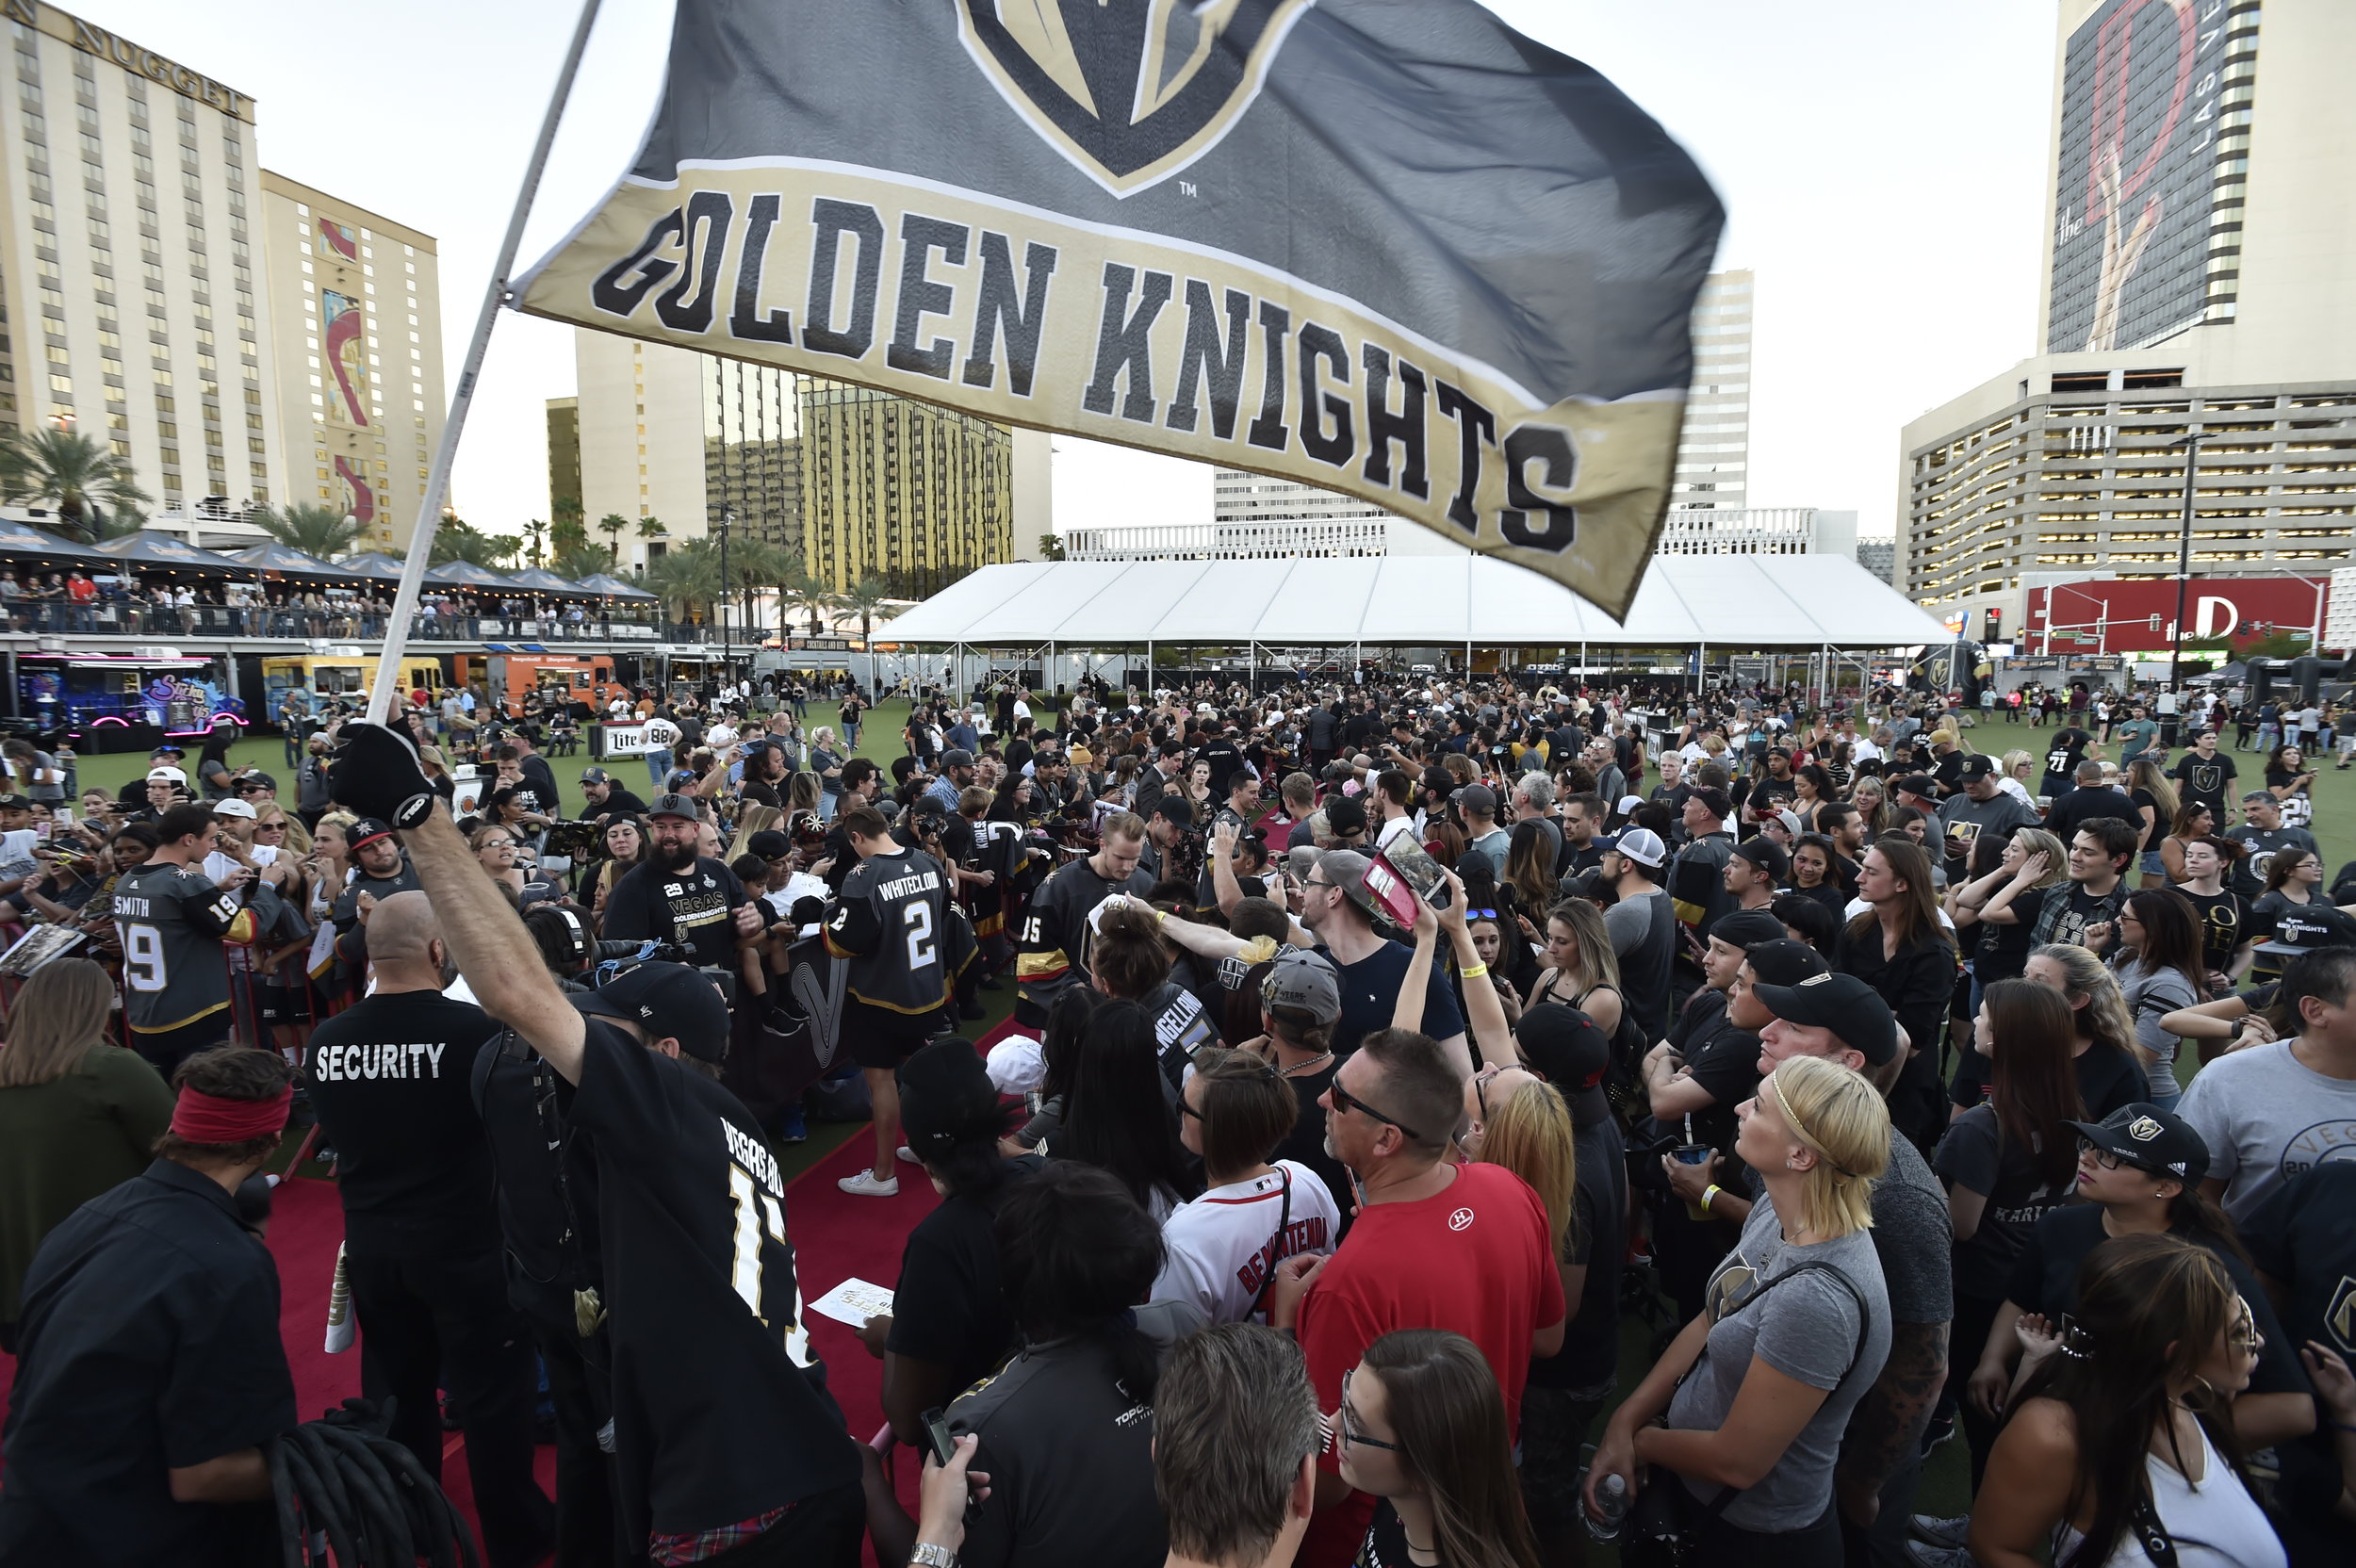 Vegas Golden Knights the realm is unlighted championship parade